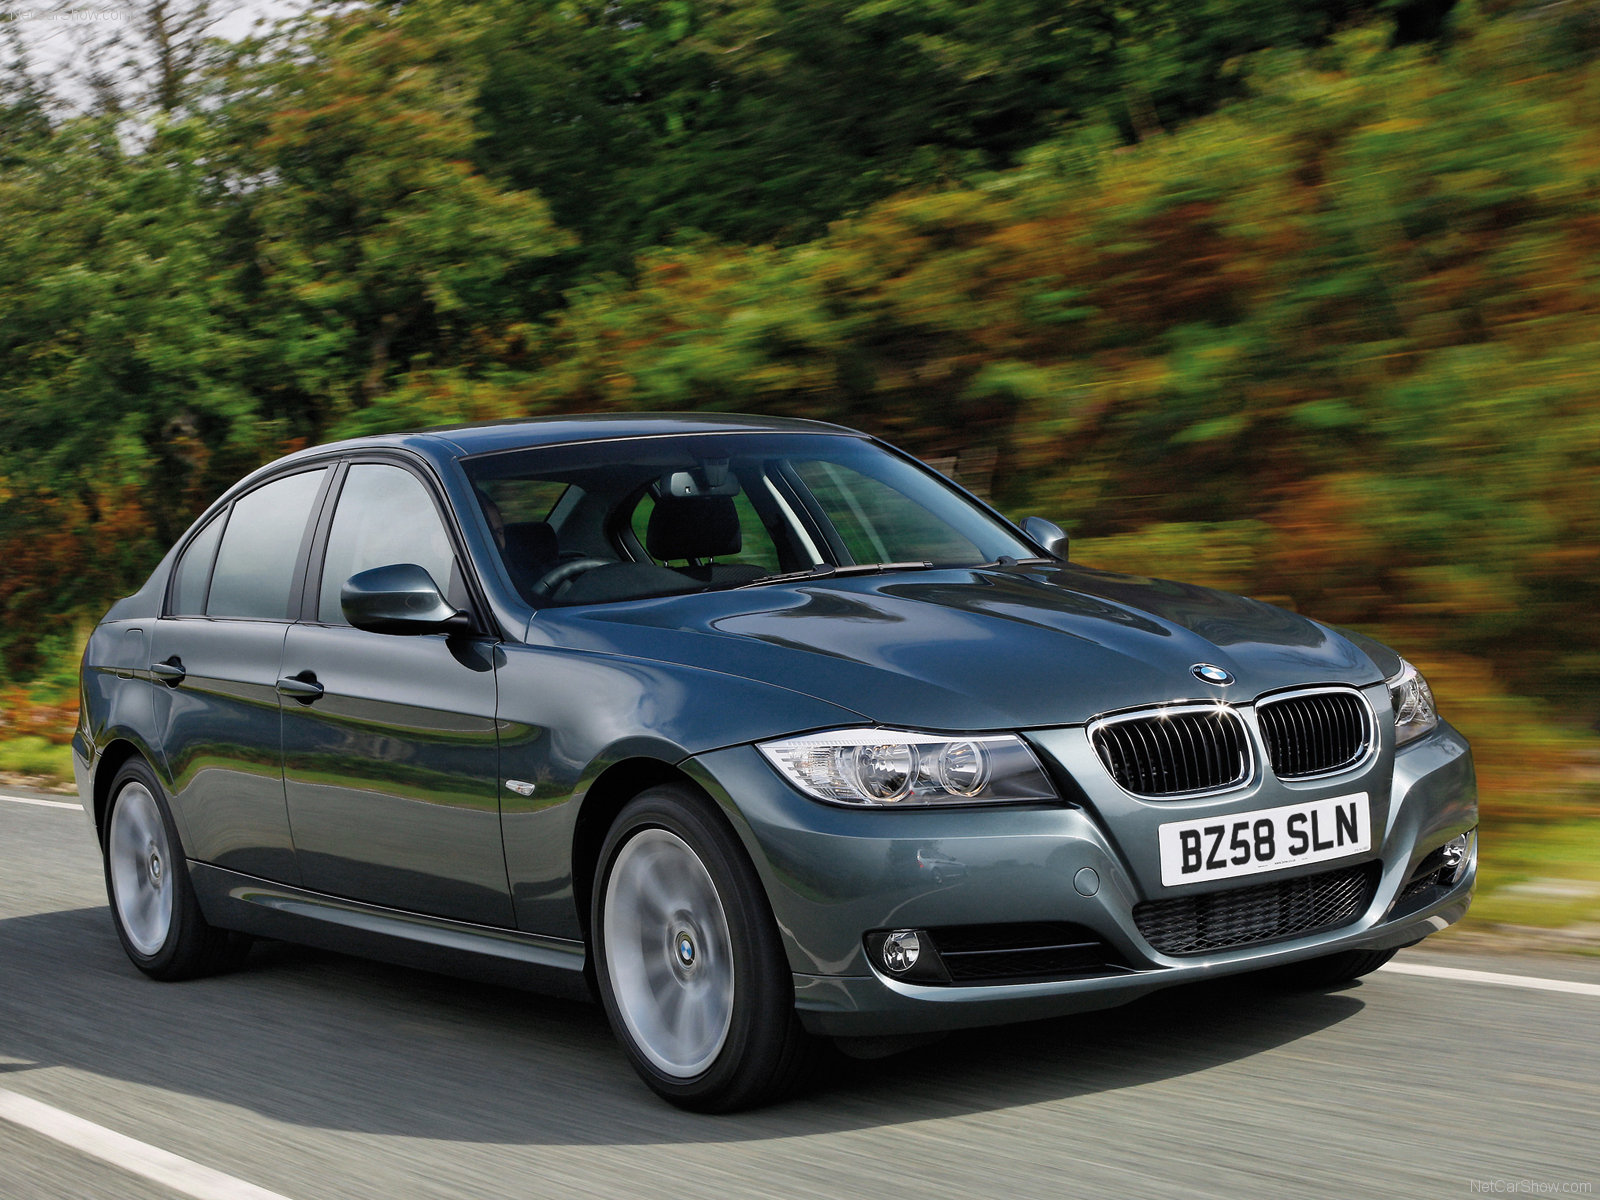 of the 2009 BMW 3 Series